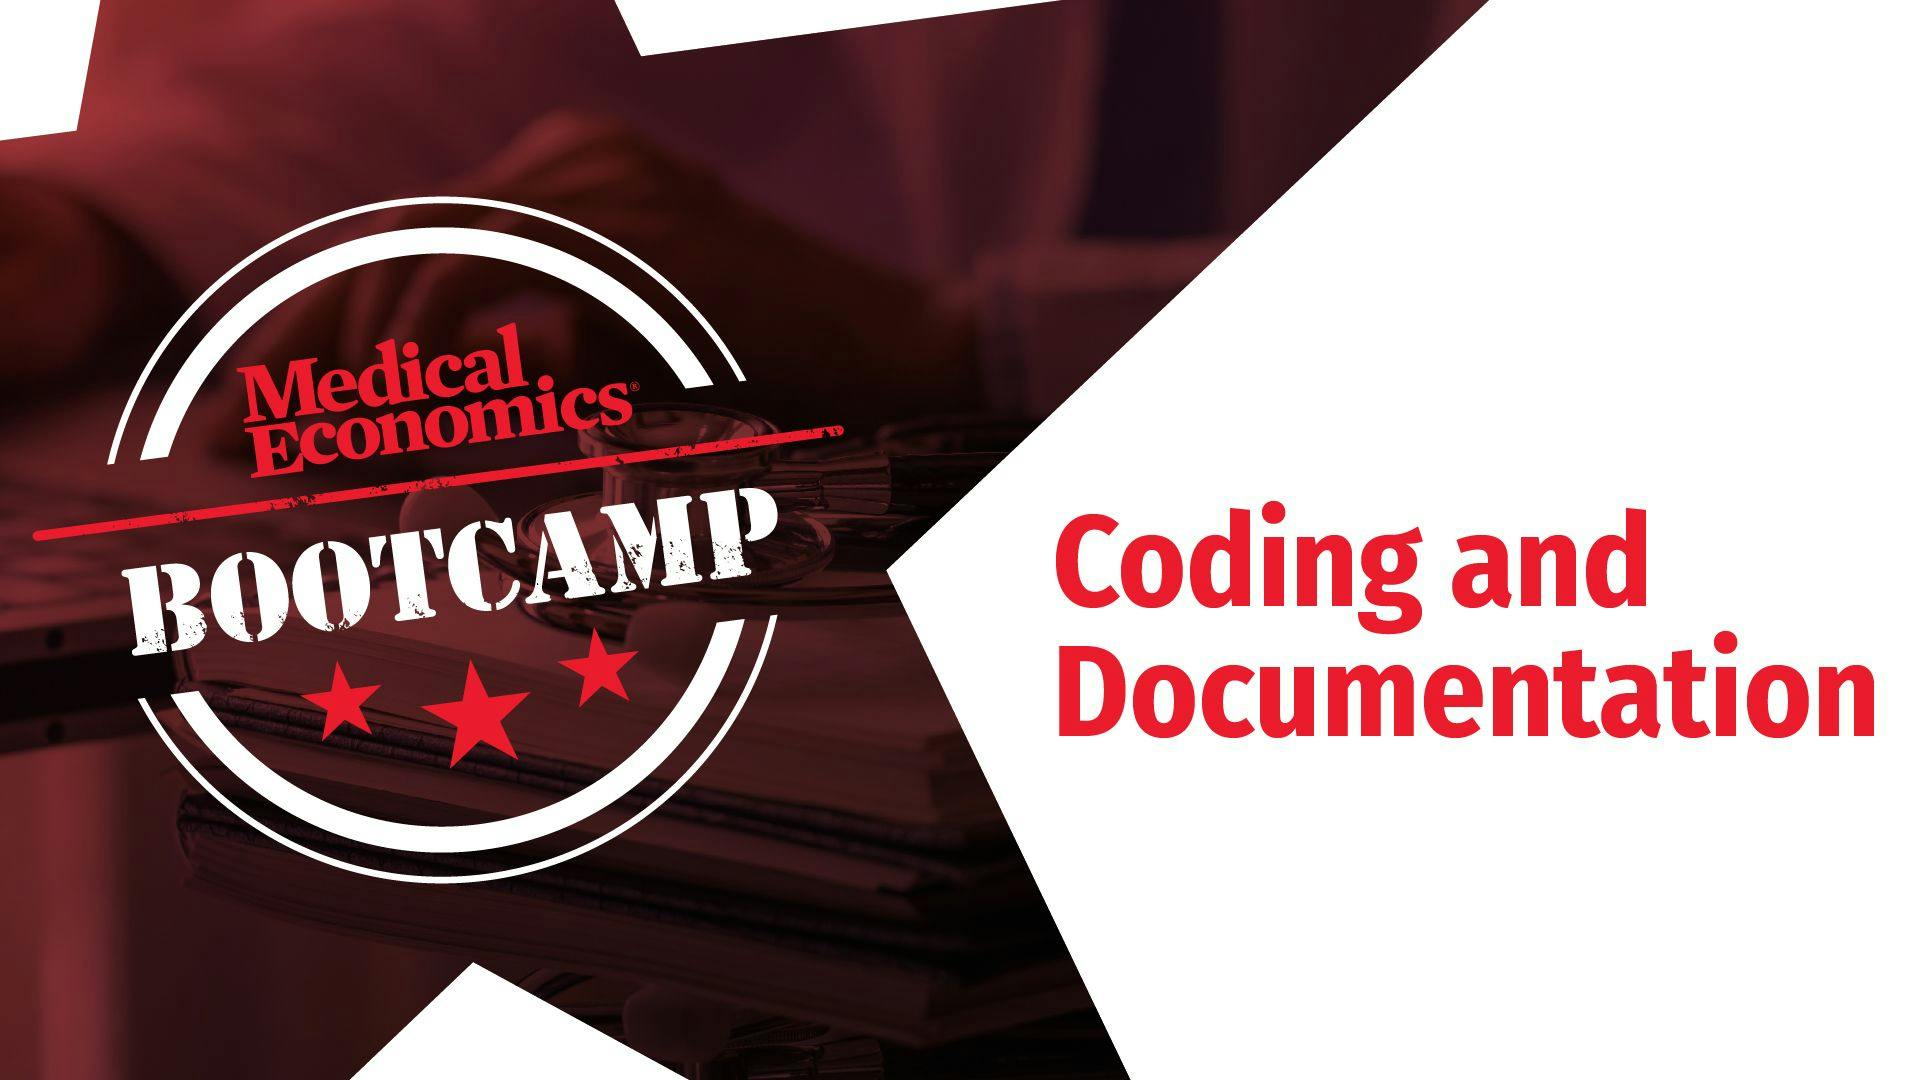 Coding and documentation best practices